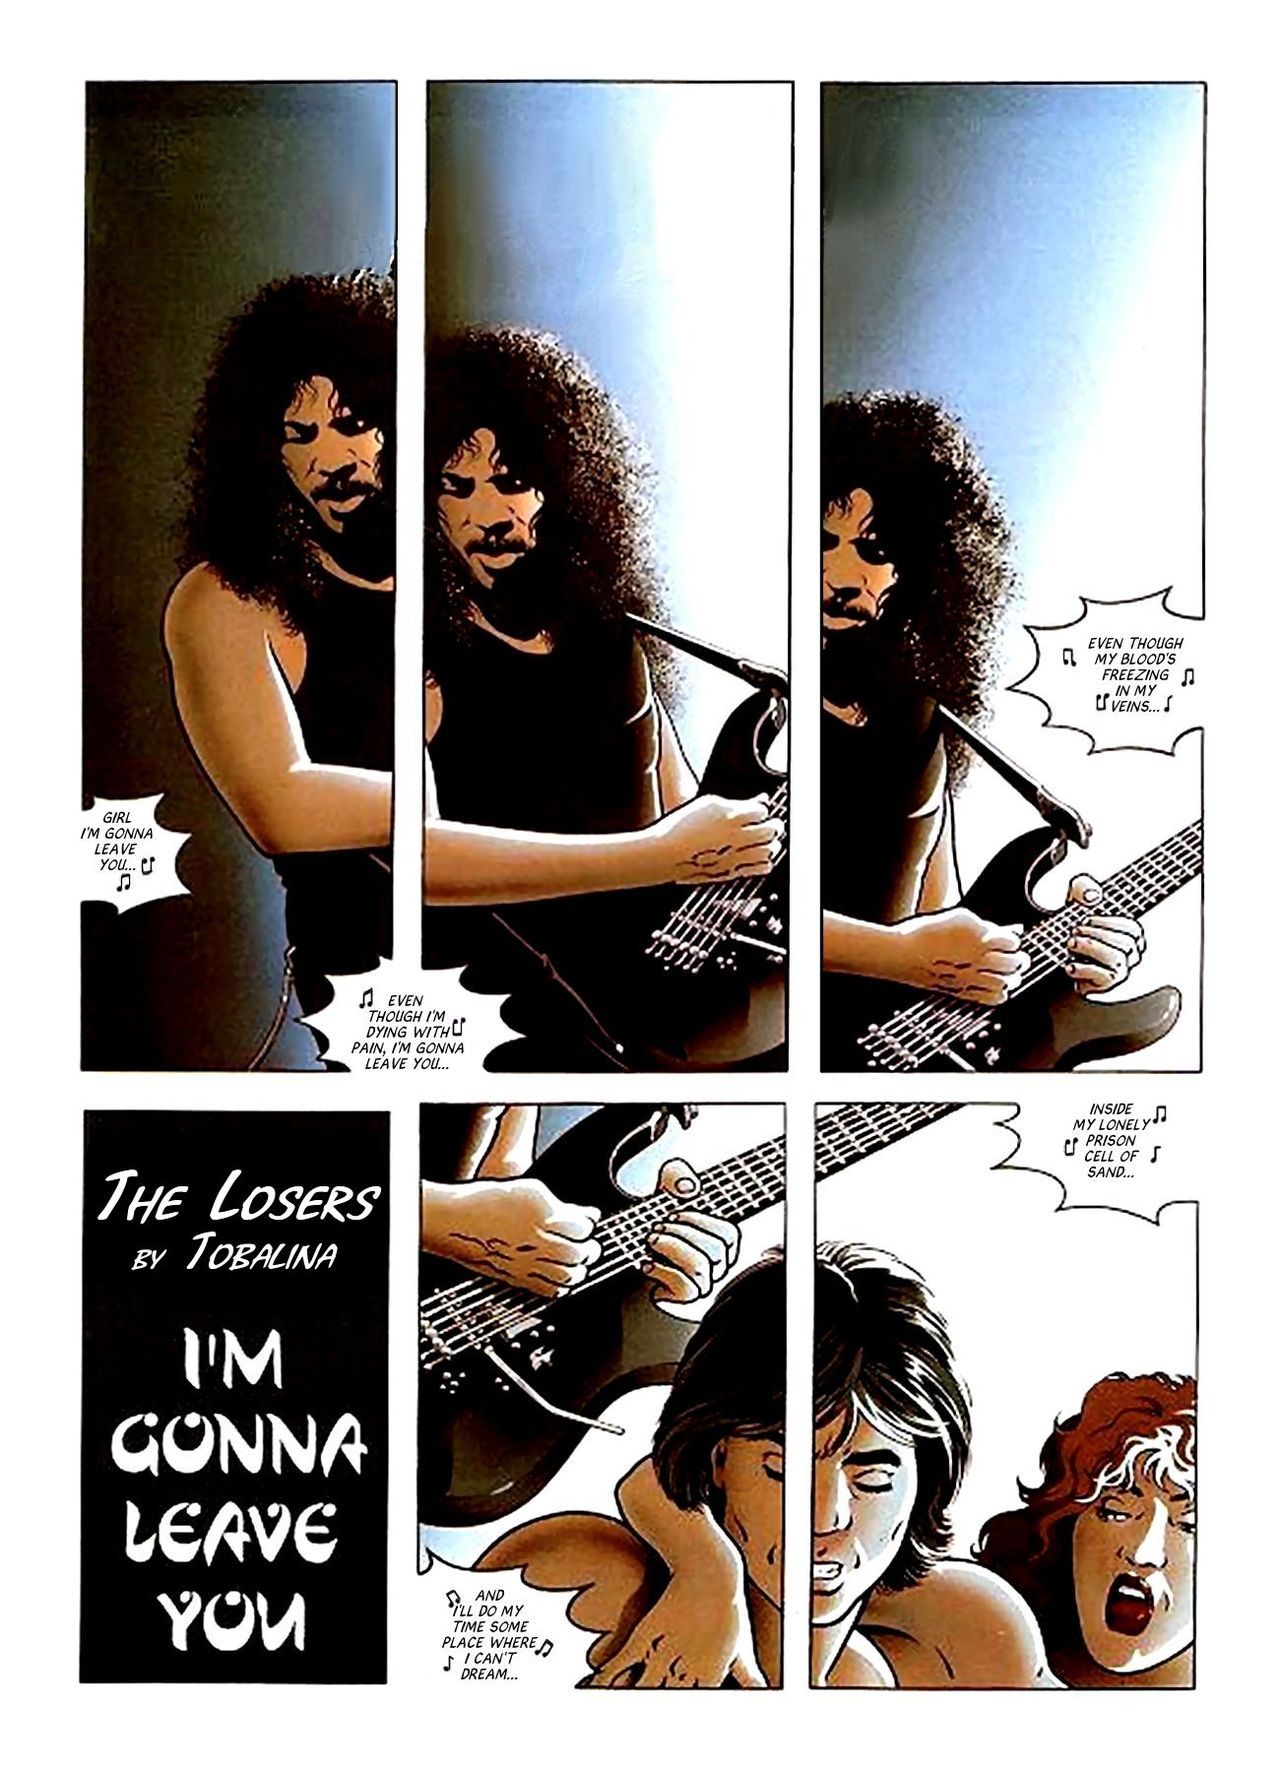 The Losers by Luis Tobalina page 2